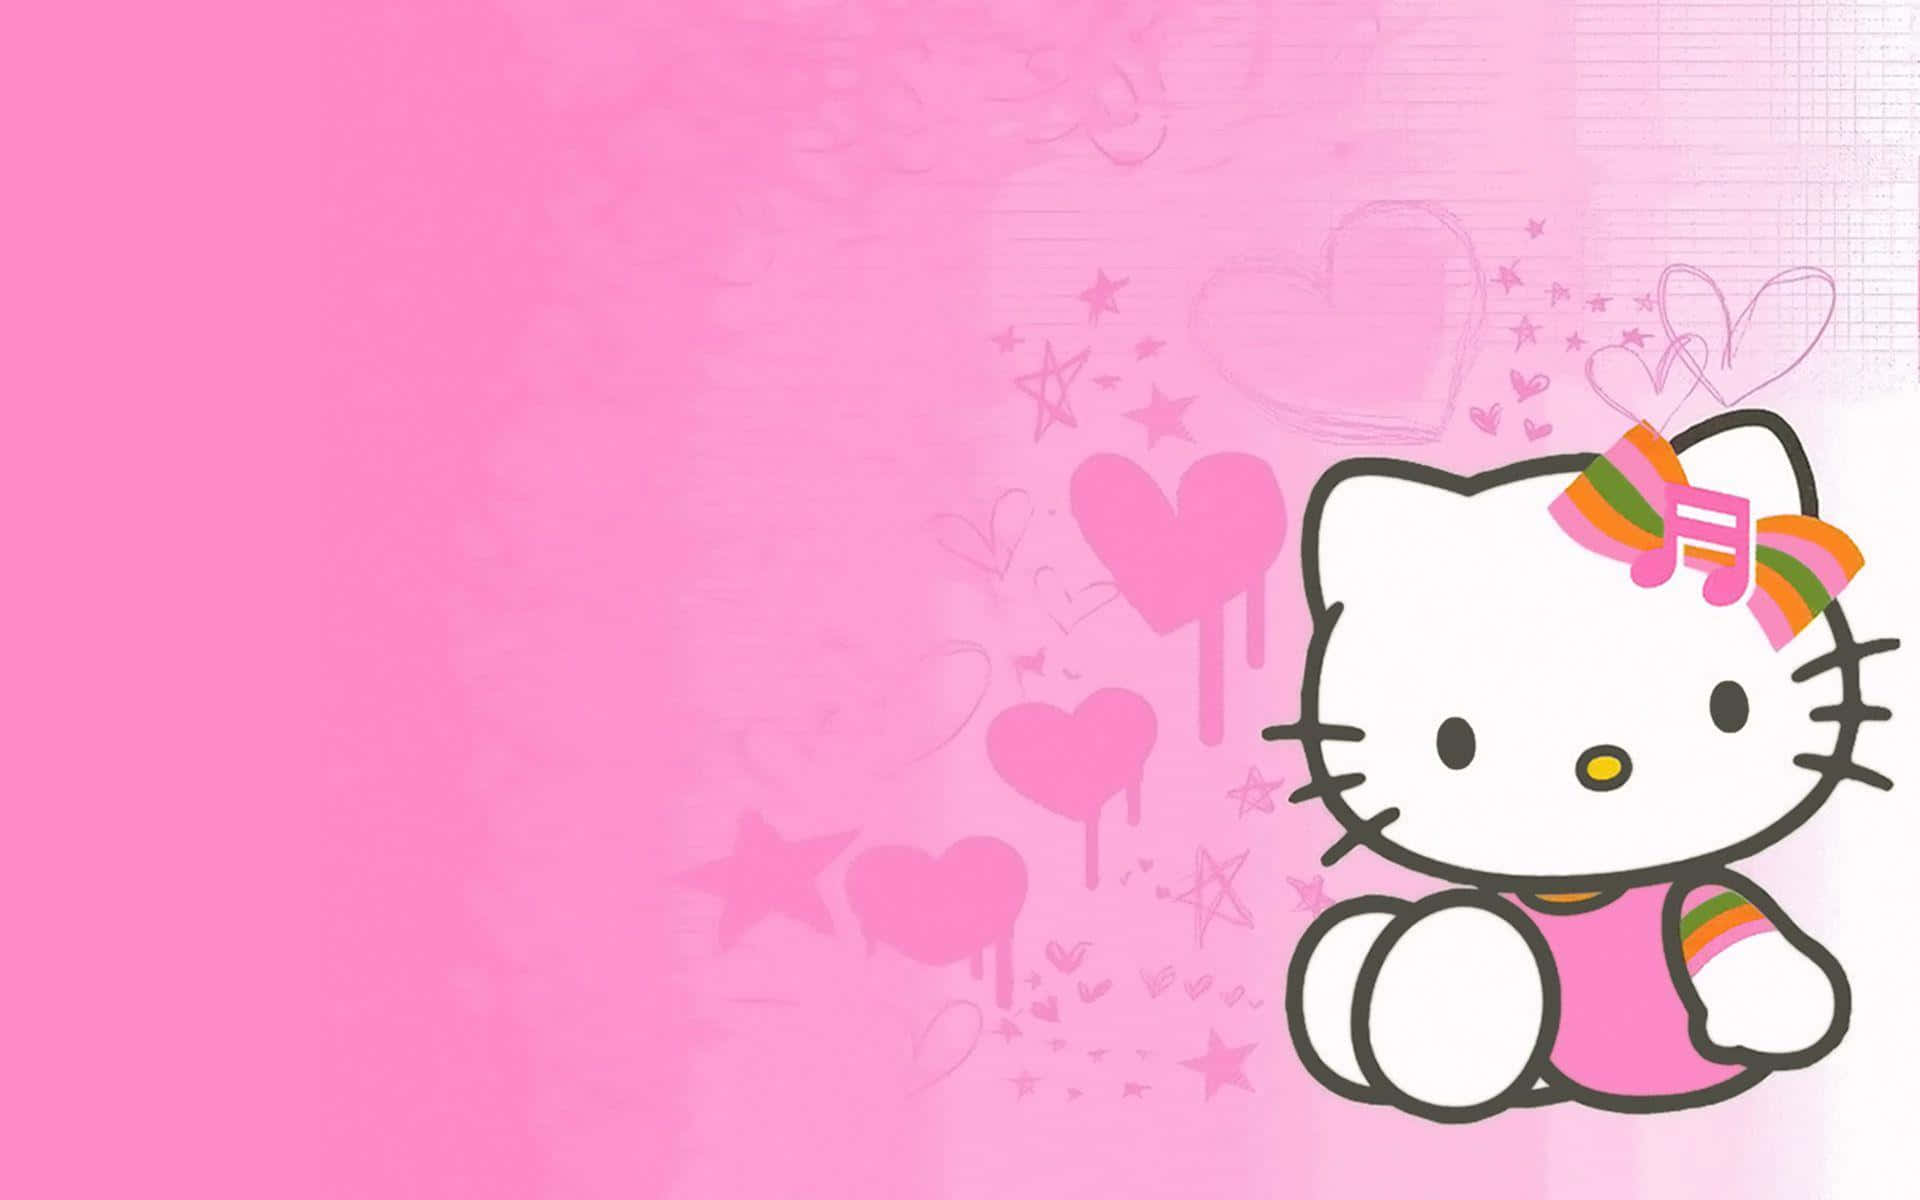 Add a bit of cuteness to your day with this bright pink background